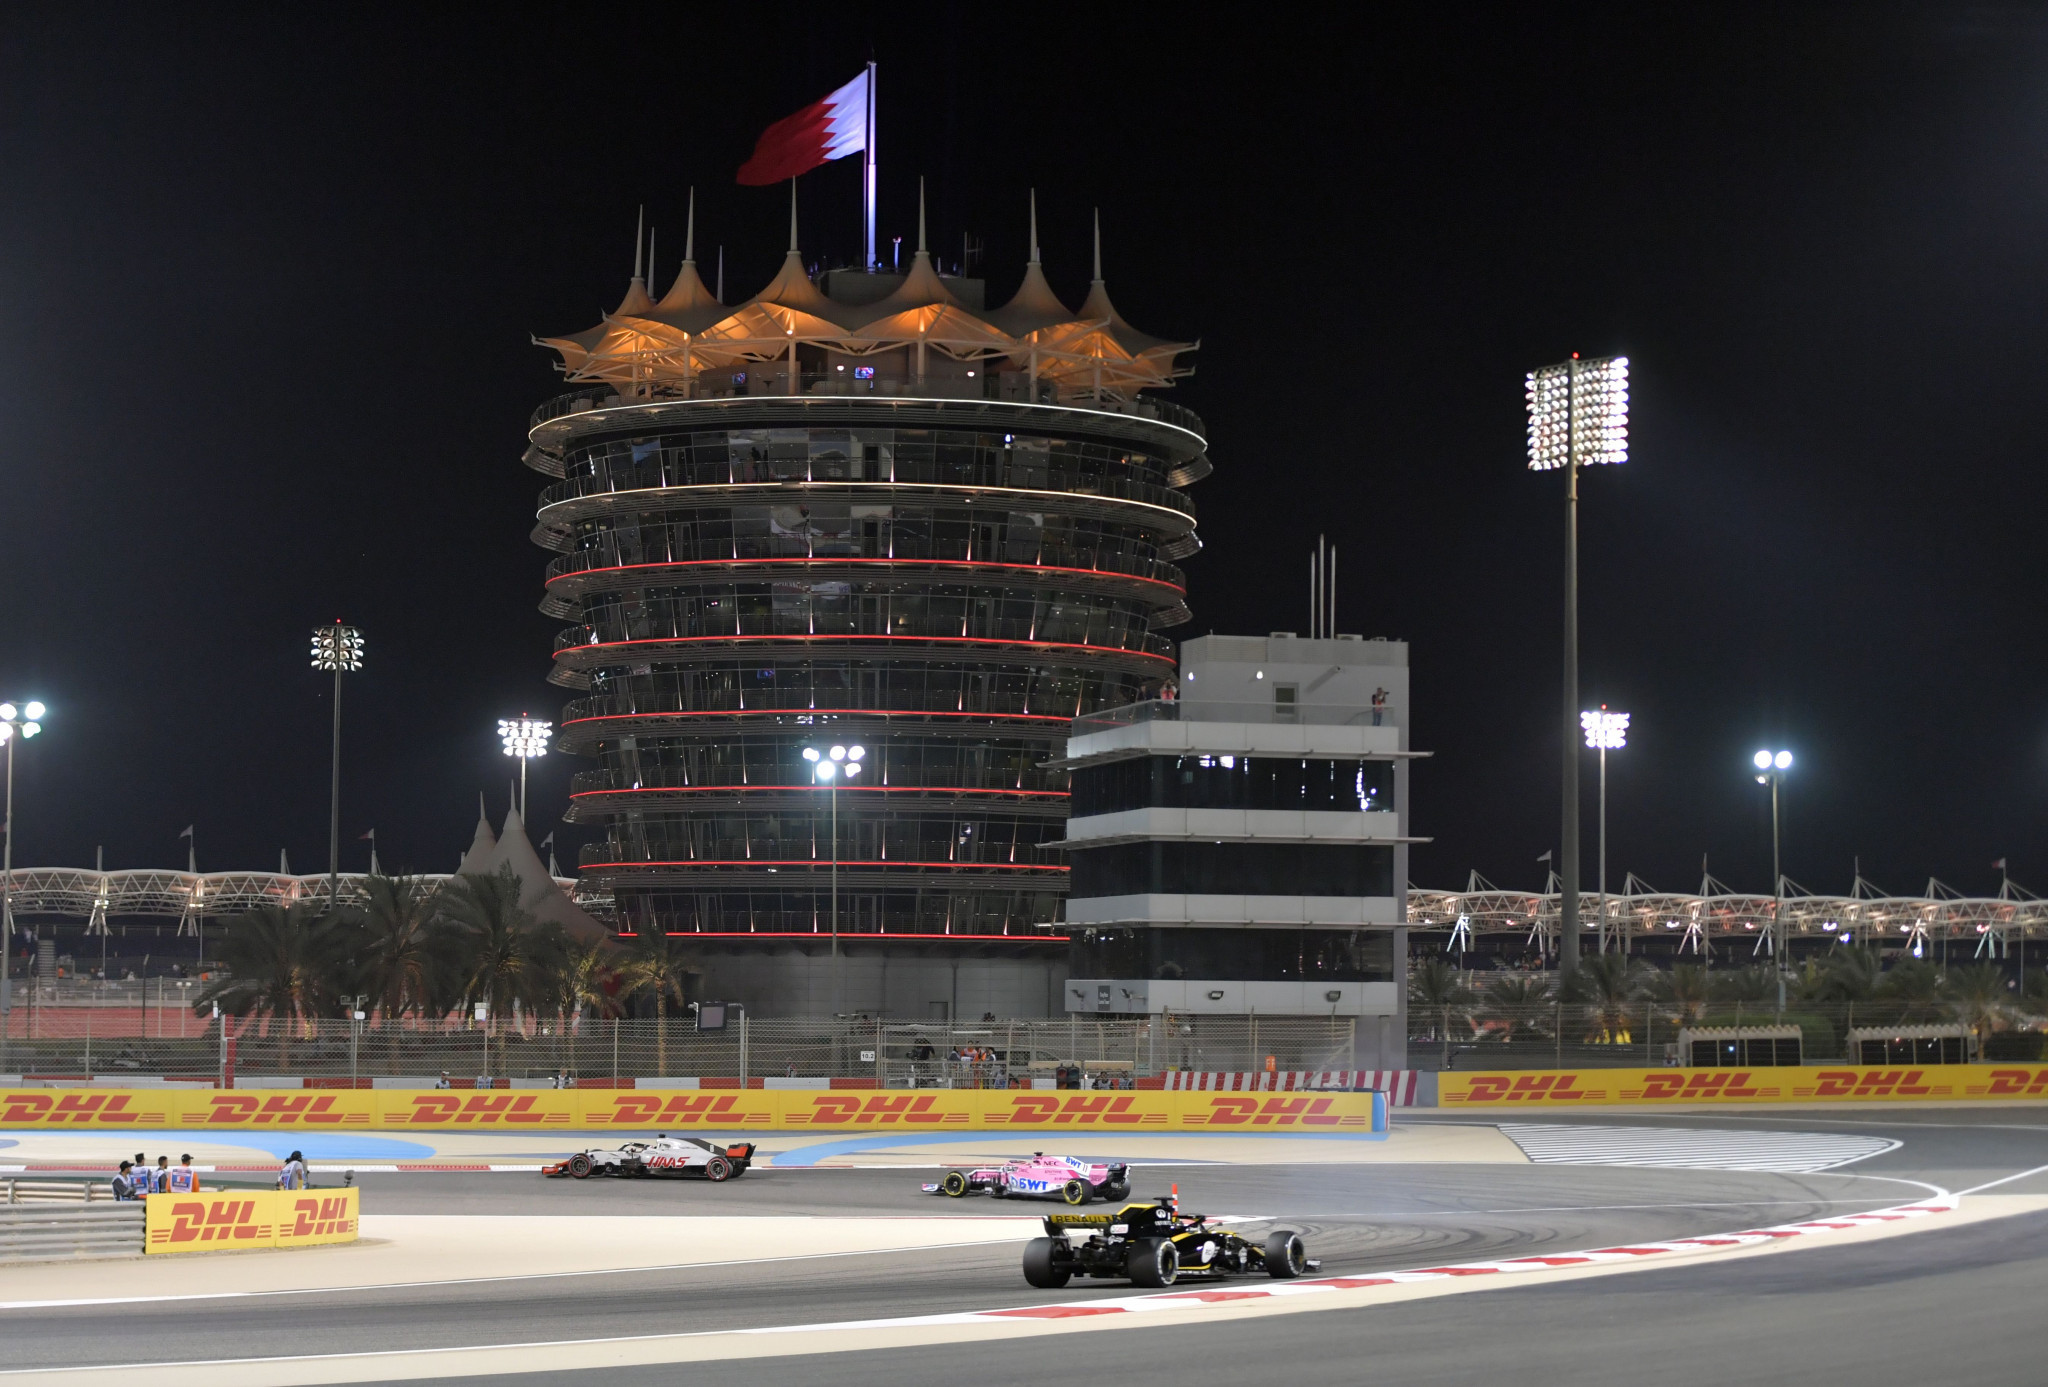 The Opening and Closing Ceremonies are scheduled to take place at the Bahrain International Circuit, which hosts the annual Formula One race ©Getty Images